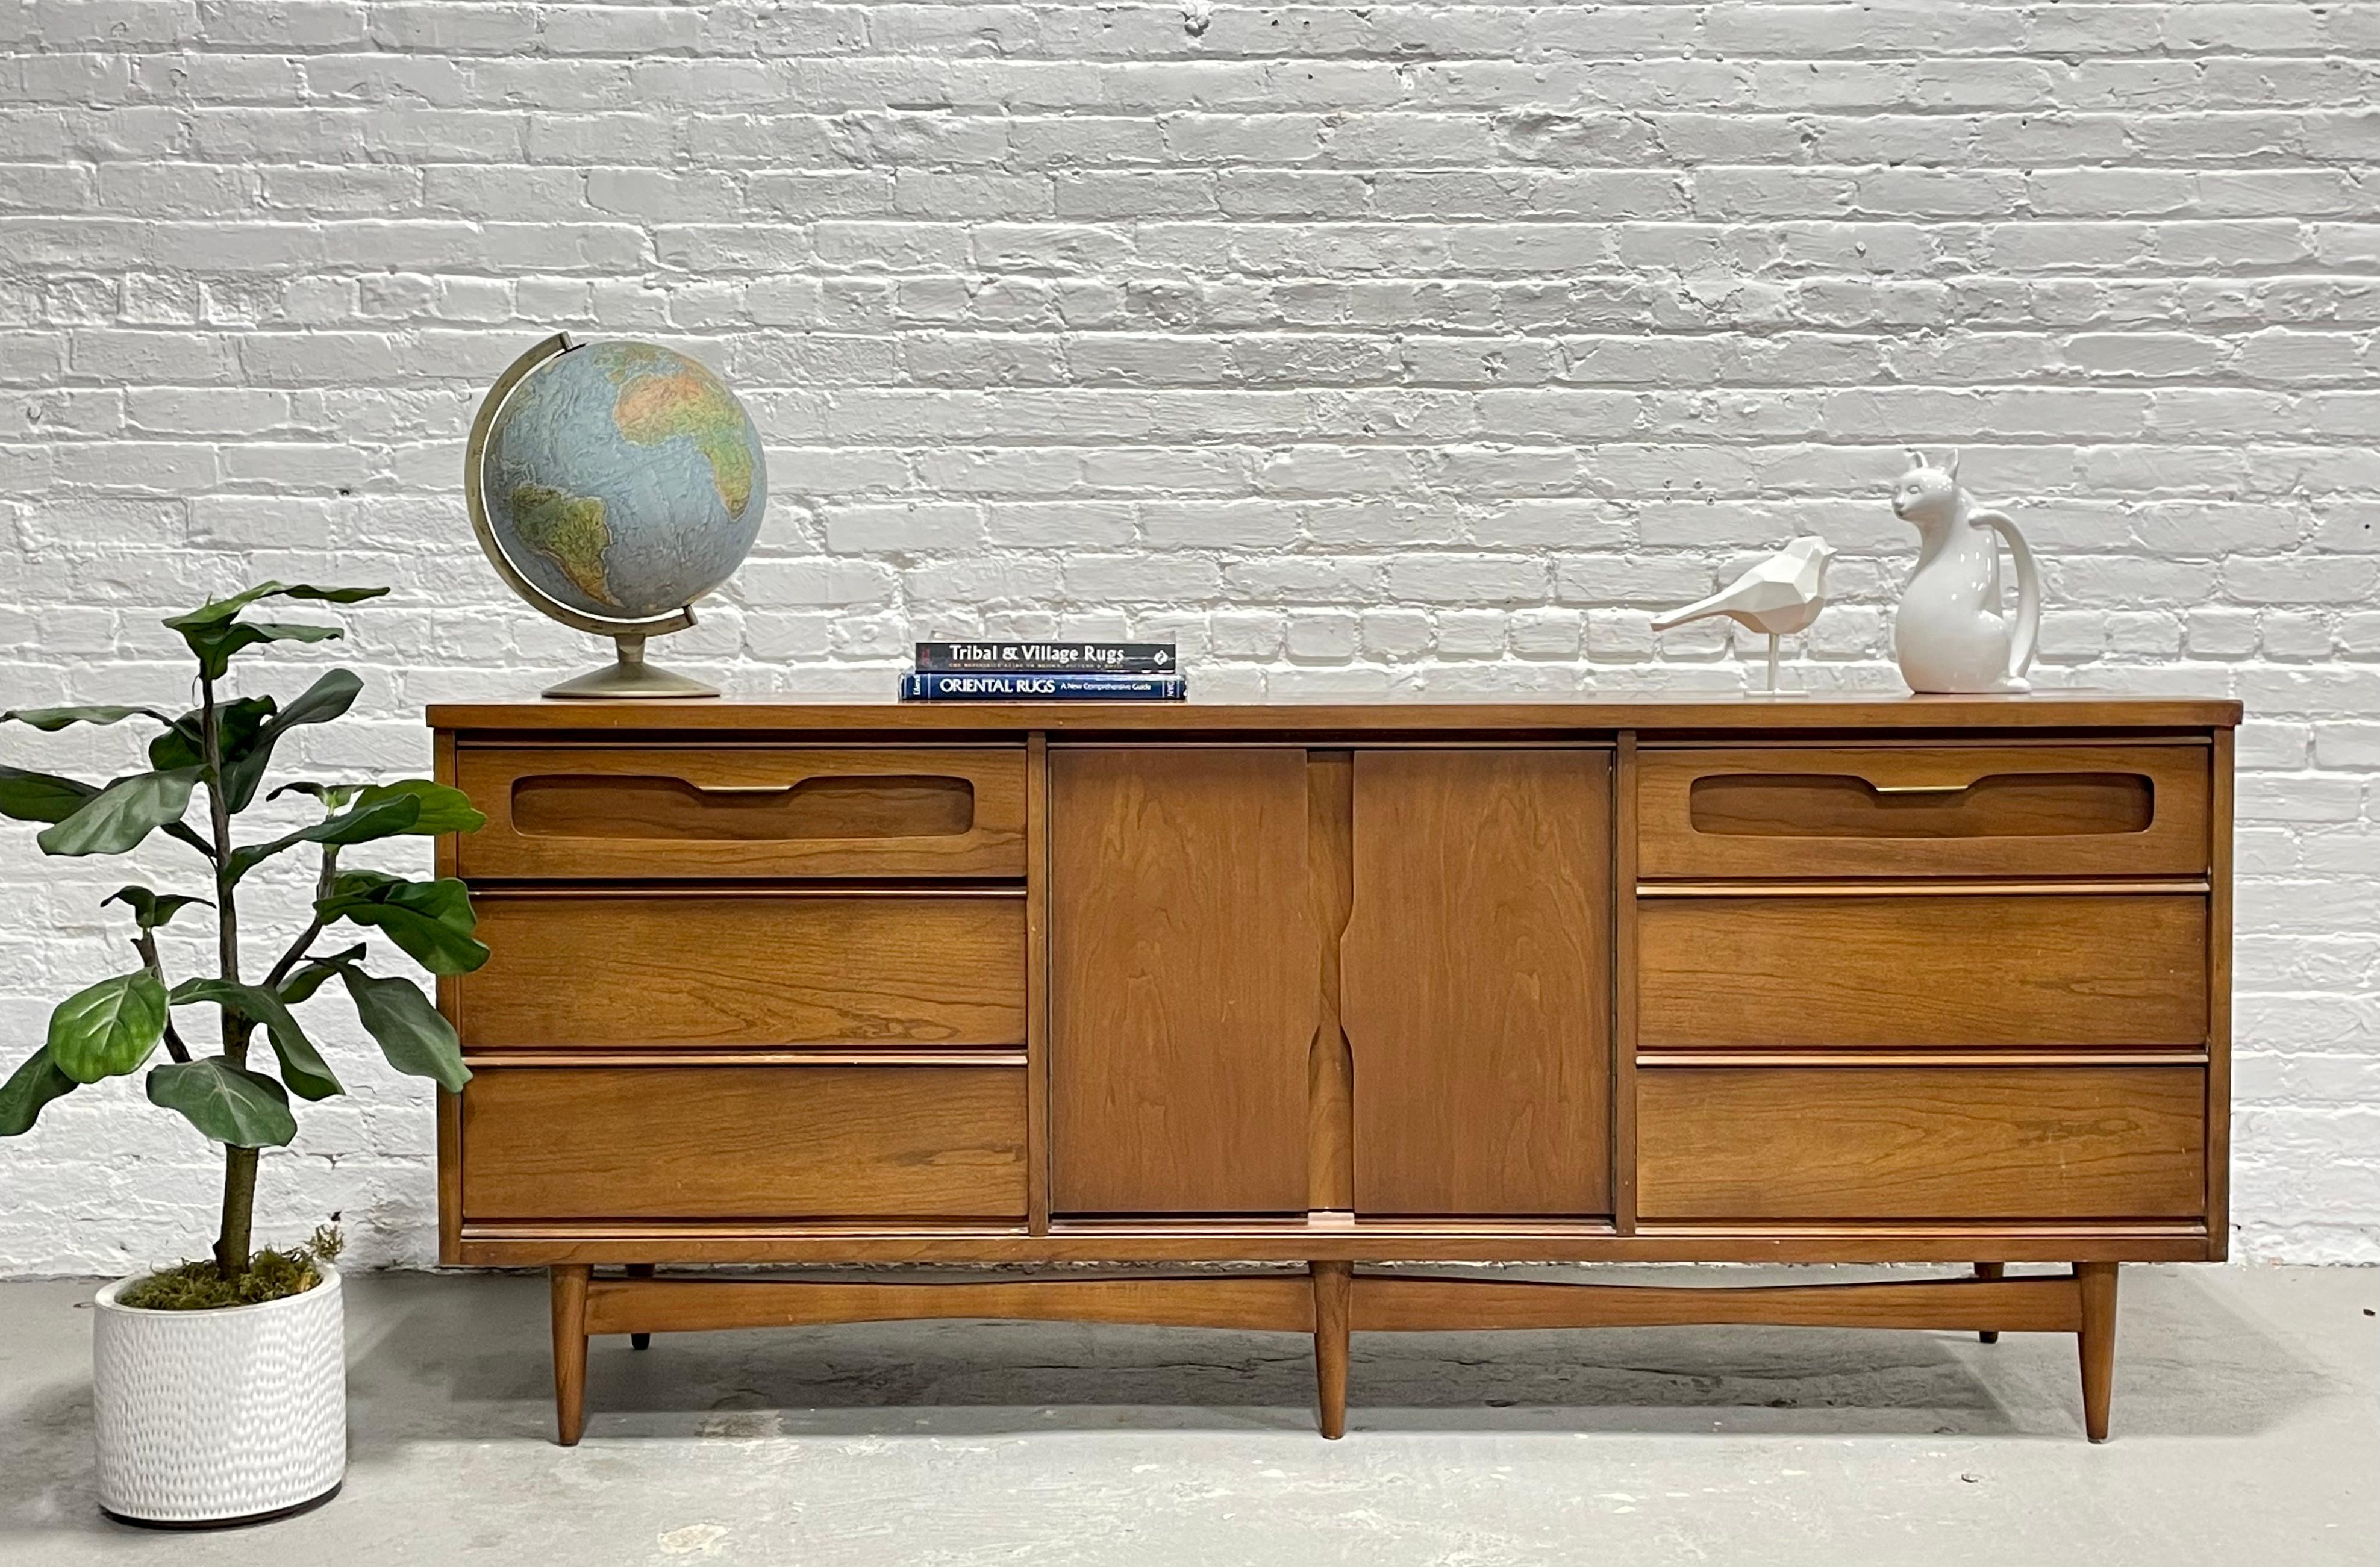 Mid-Century Modern Long Walnut Dresser by Bassett Furniture Co., circa 1960s. This long dresser packs a punch with a total of 8 deep and spacious drawers for all your clothing storage needs. Good original condition with some touch-ups and signs of